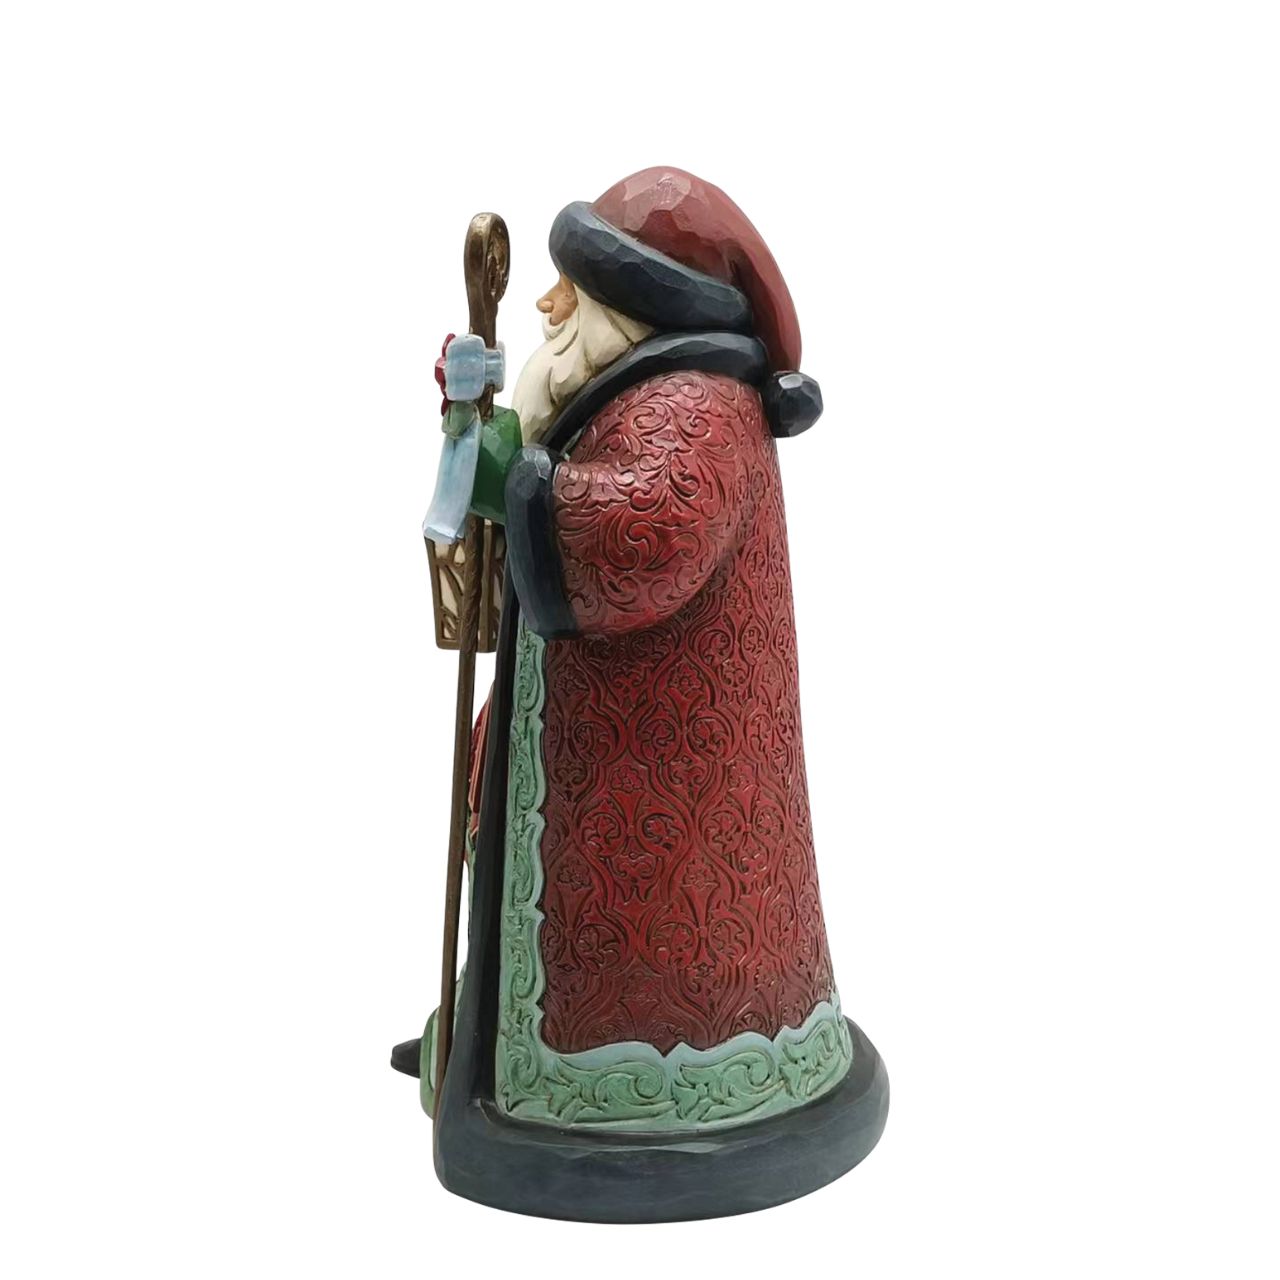 Heartwood Creek Holiday Manor Santa with Cane Figurine  Designed by award winning artist Jim Shore as part of the Heartwood Creek Holiday Manor Collection, hand crafted using high quality cast stone and hand painted, this Santa with his cane is perfect for the Christmas season